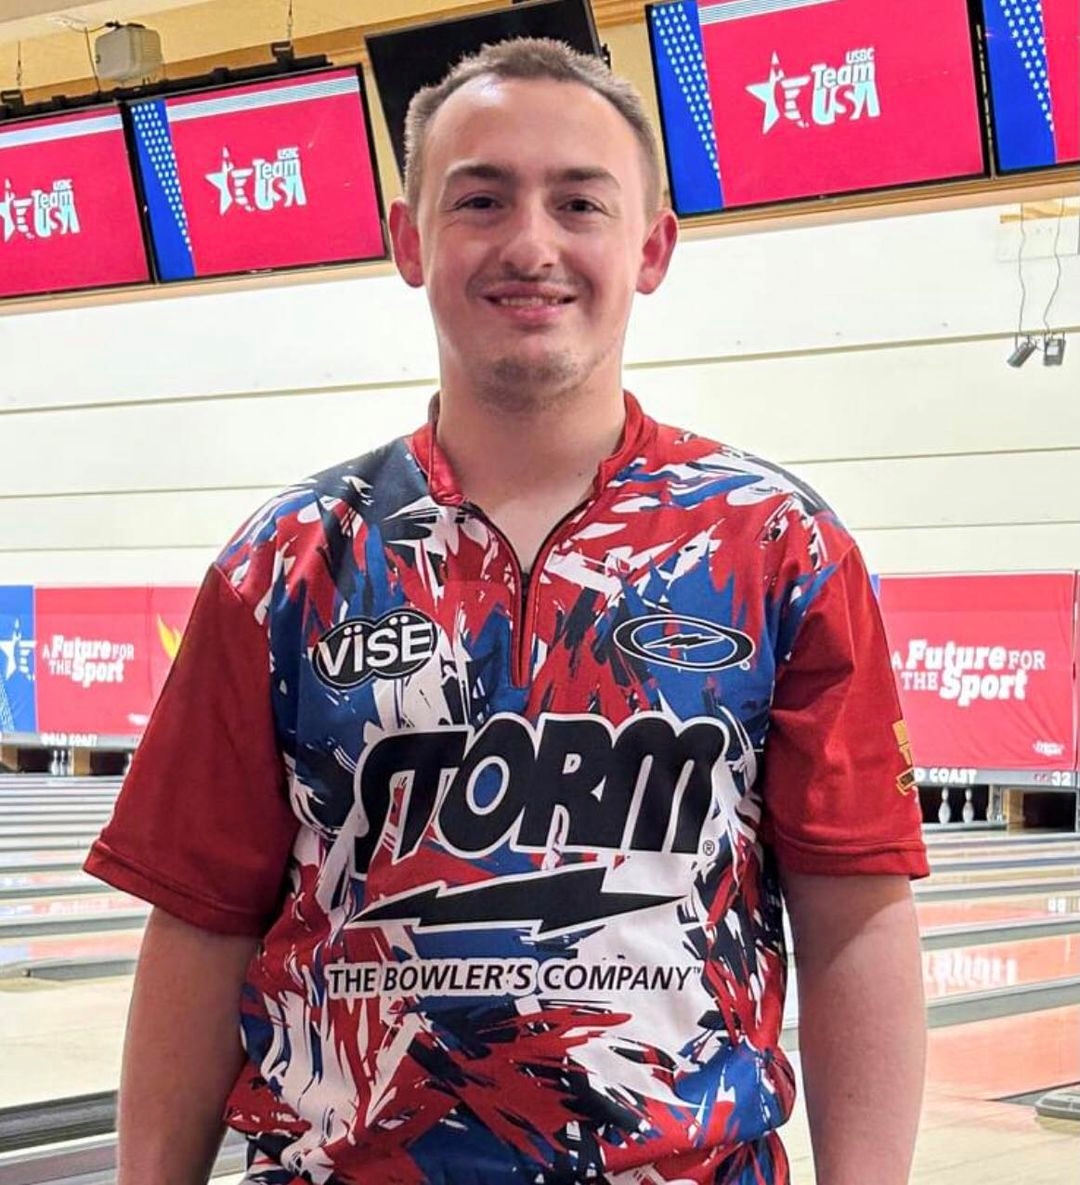 Bowler Spencer Robarge stands next to bowling lanes